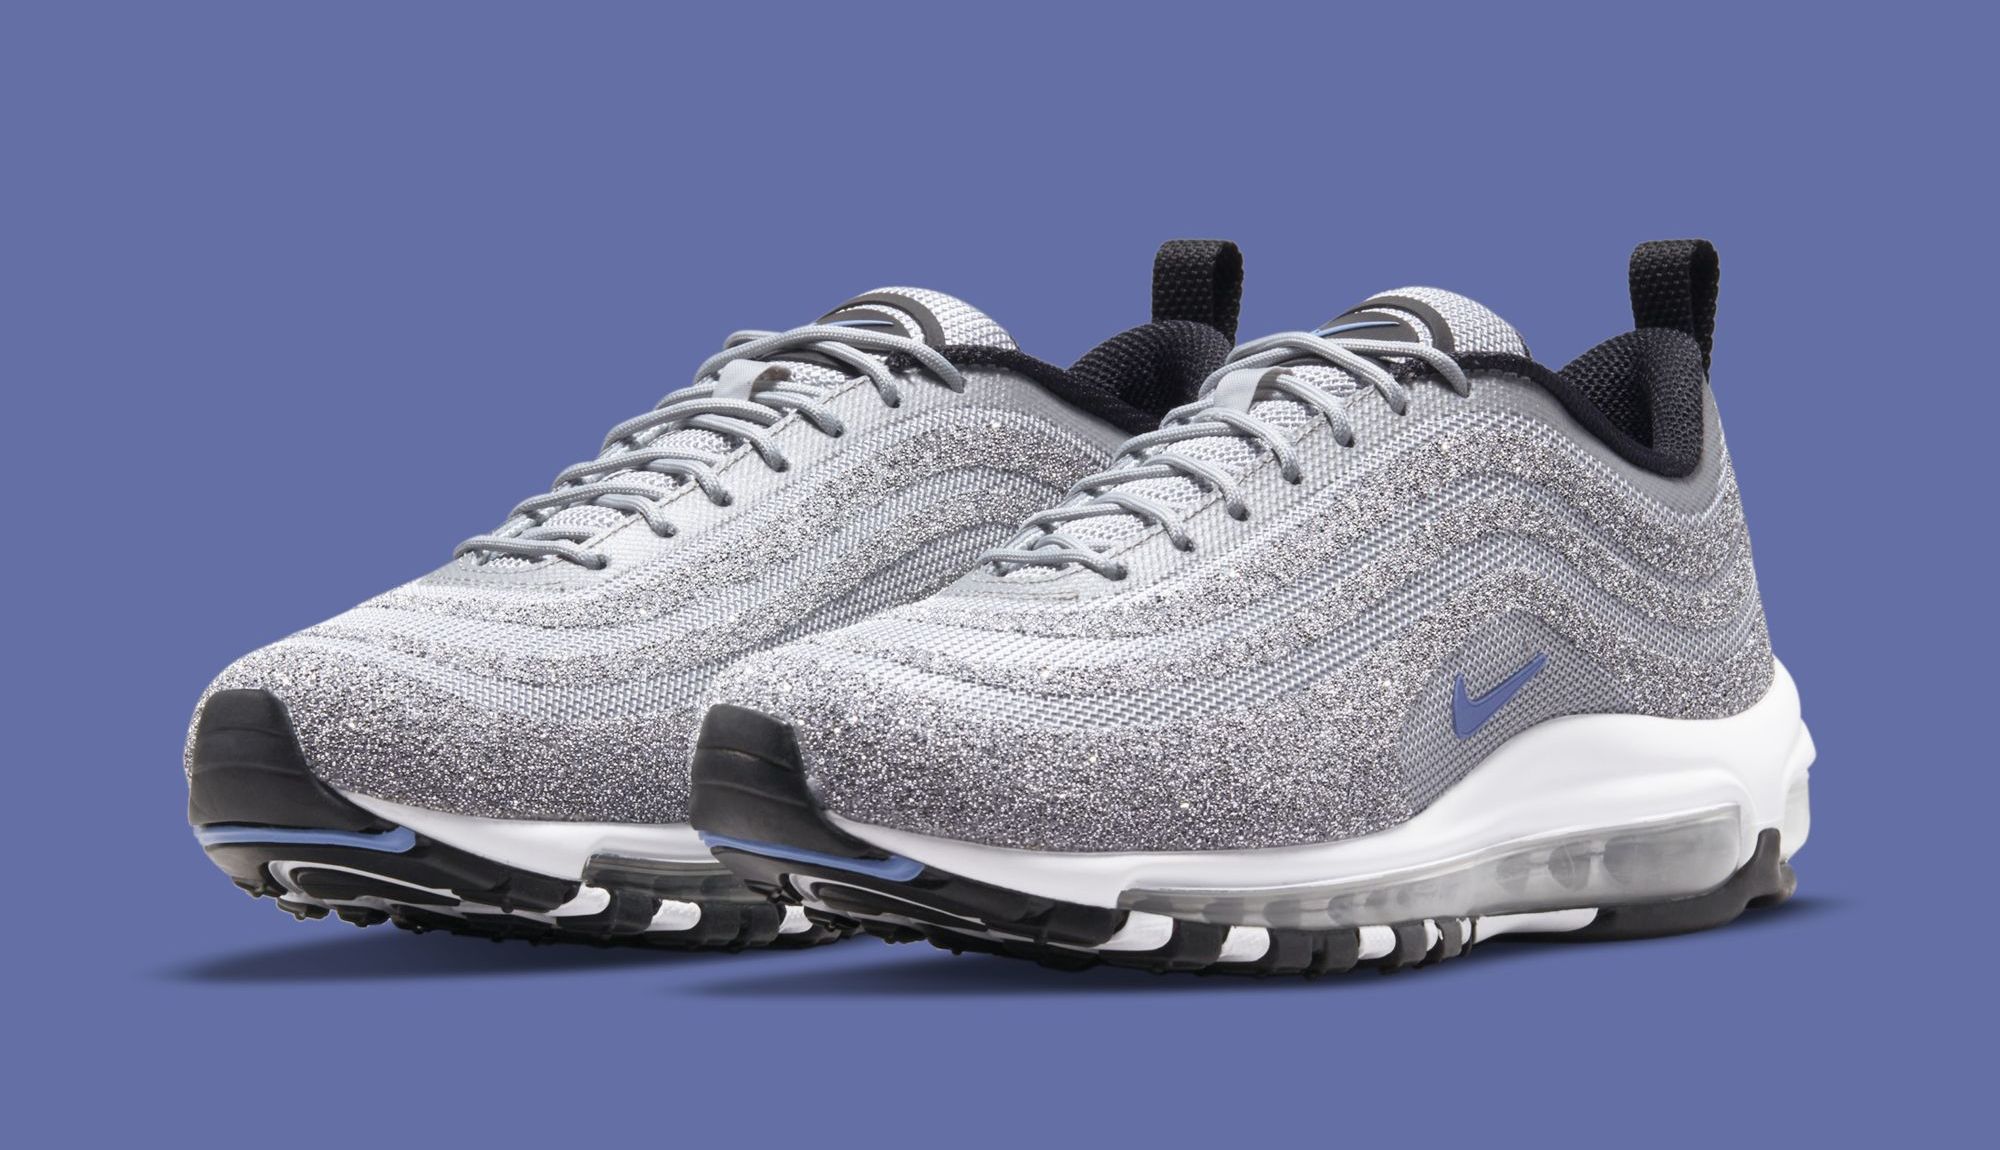 Nike's Dropping a New Swarovski-Covered Air Max 97 | Complex